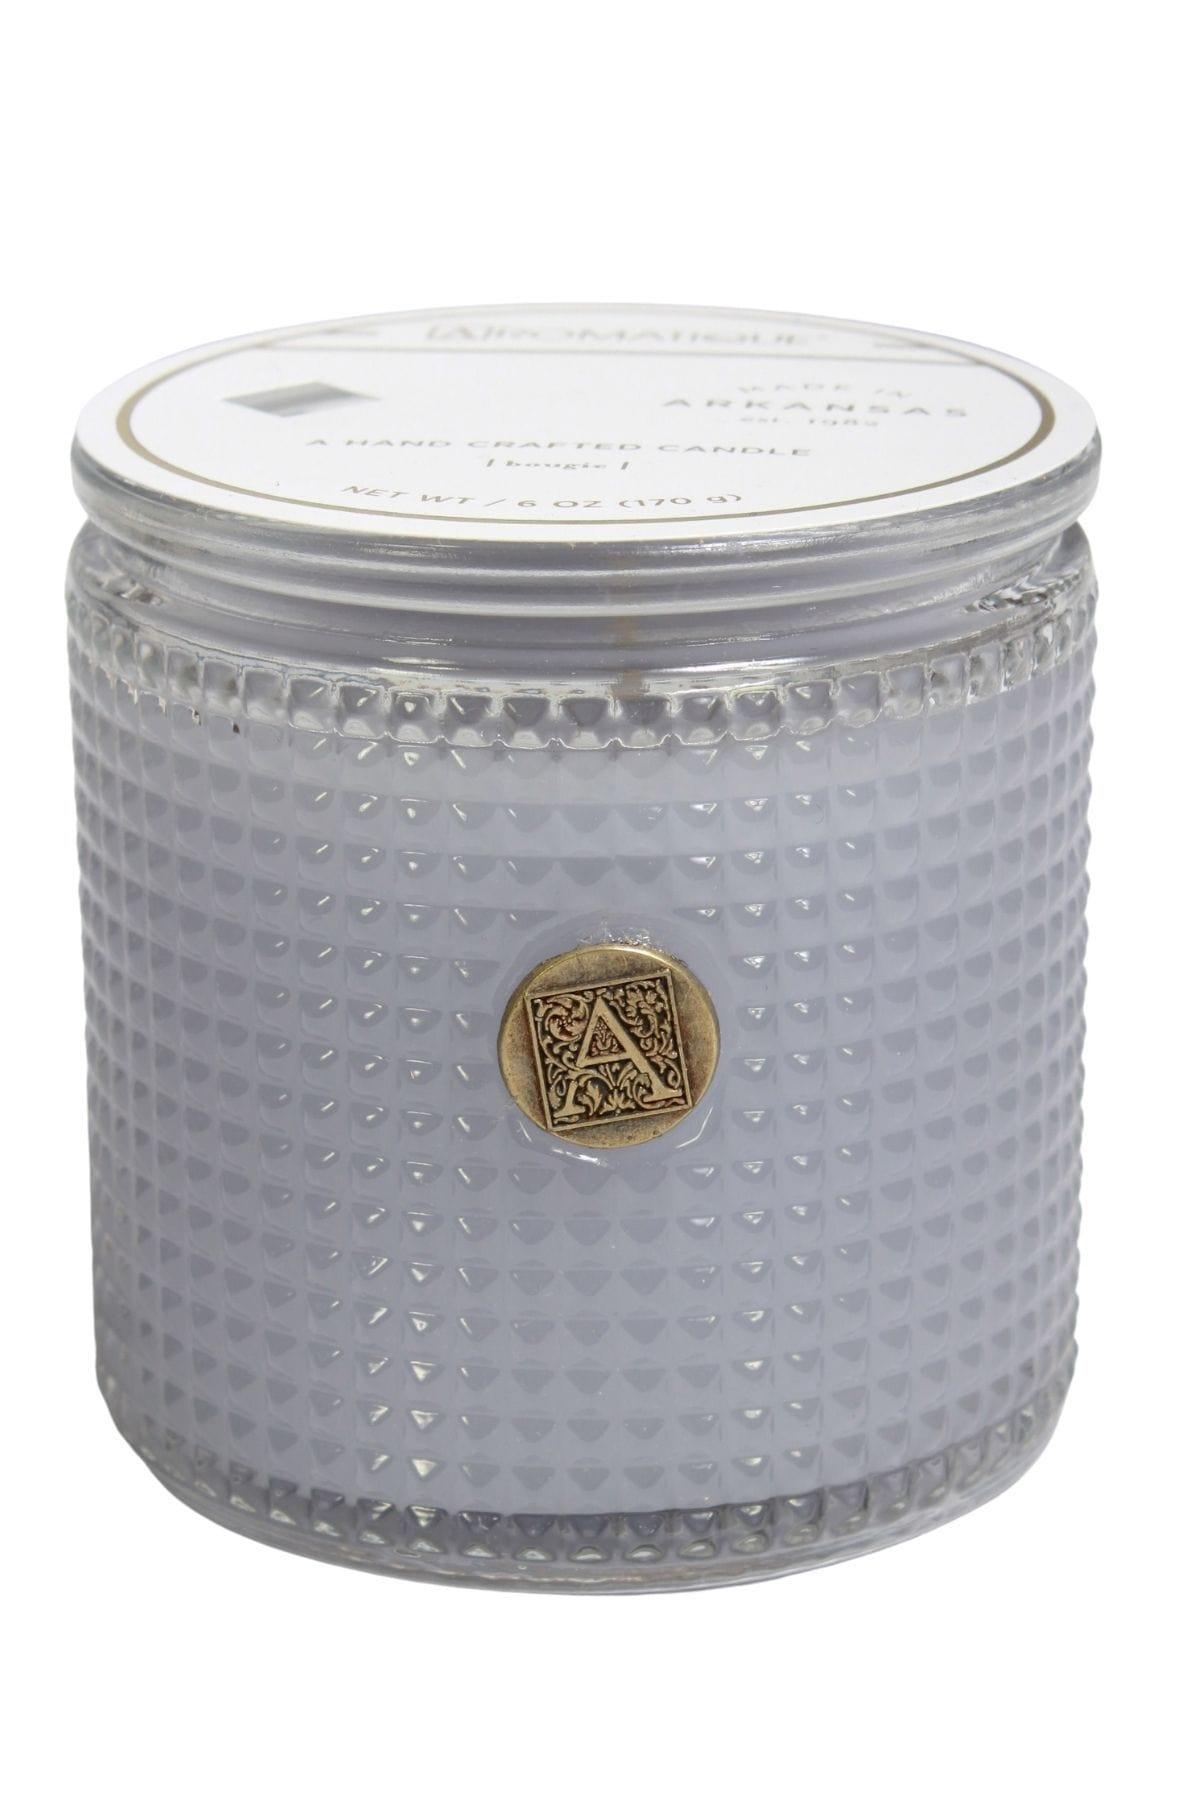 Viola Driftwood fragrance textured glass candle by Aromatique 